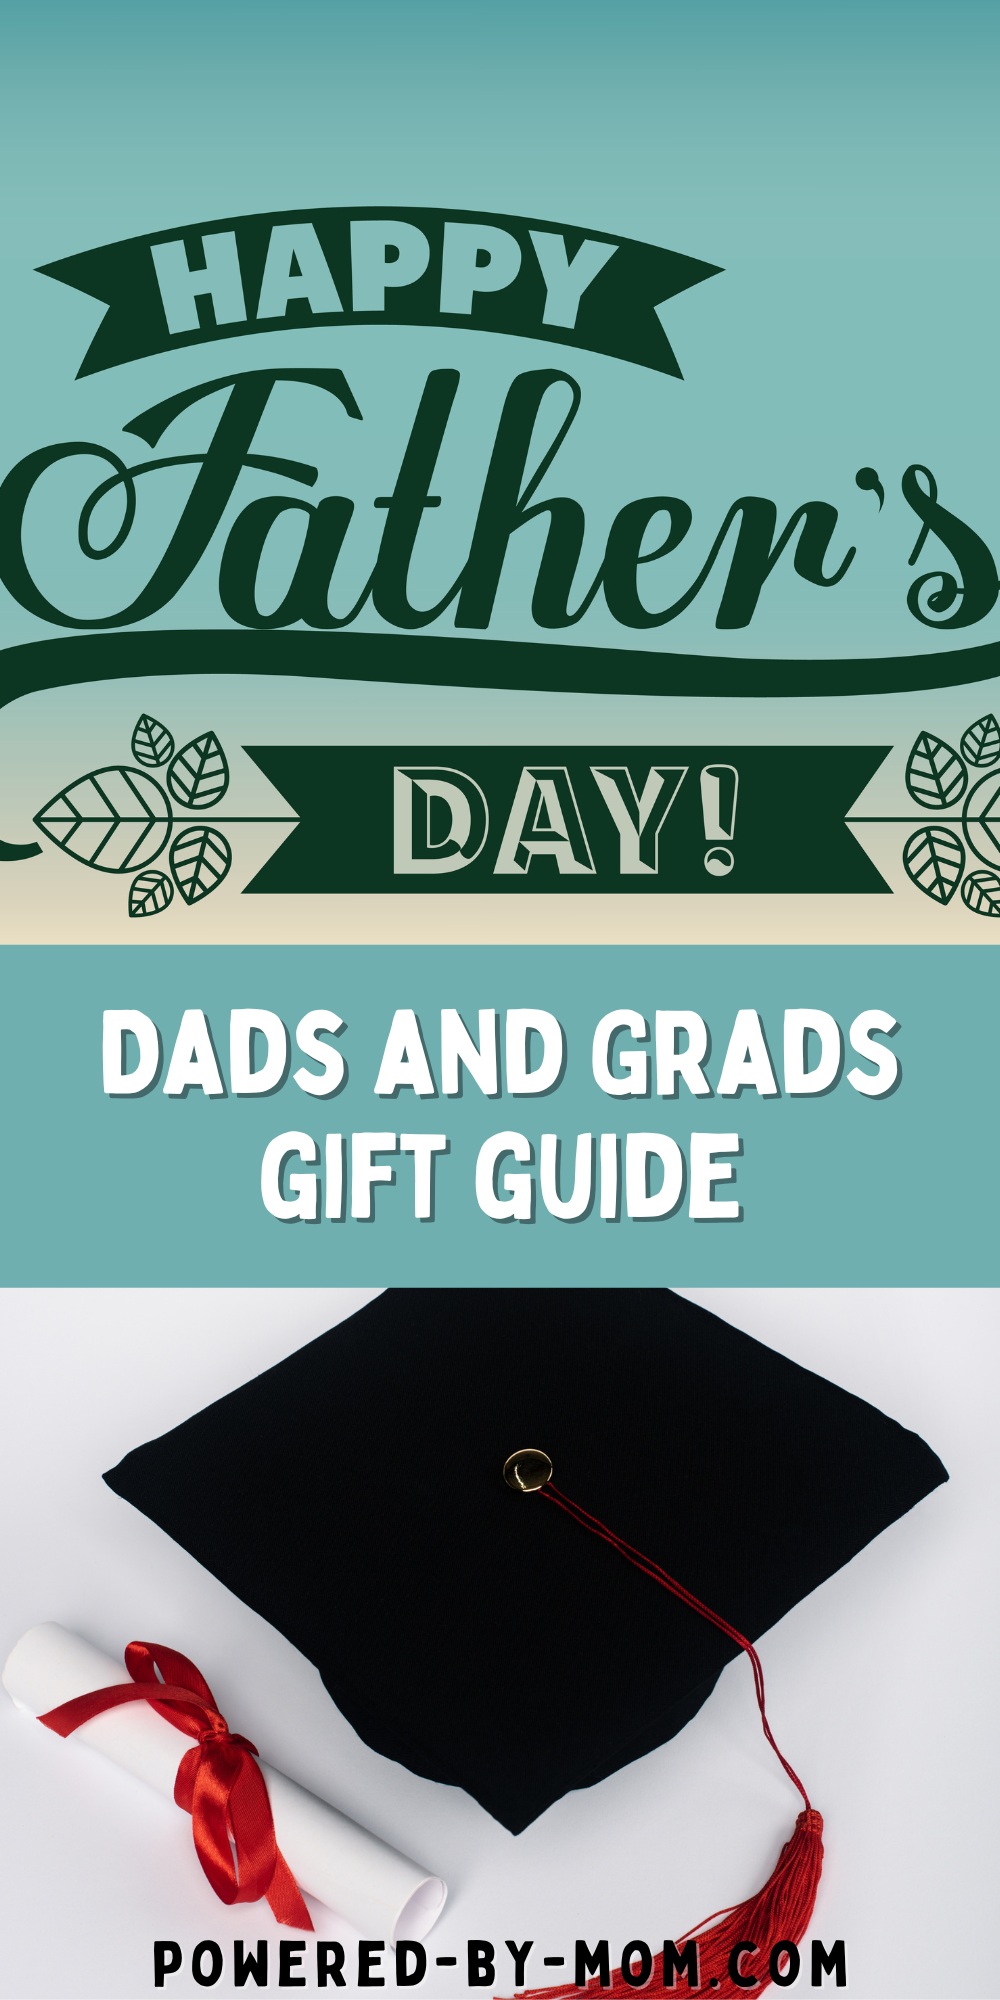 Gift ideas for the dads or just that special guy in your life and all the wonderful grads.